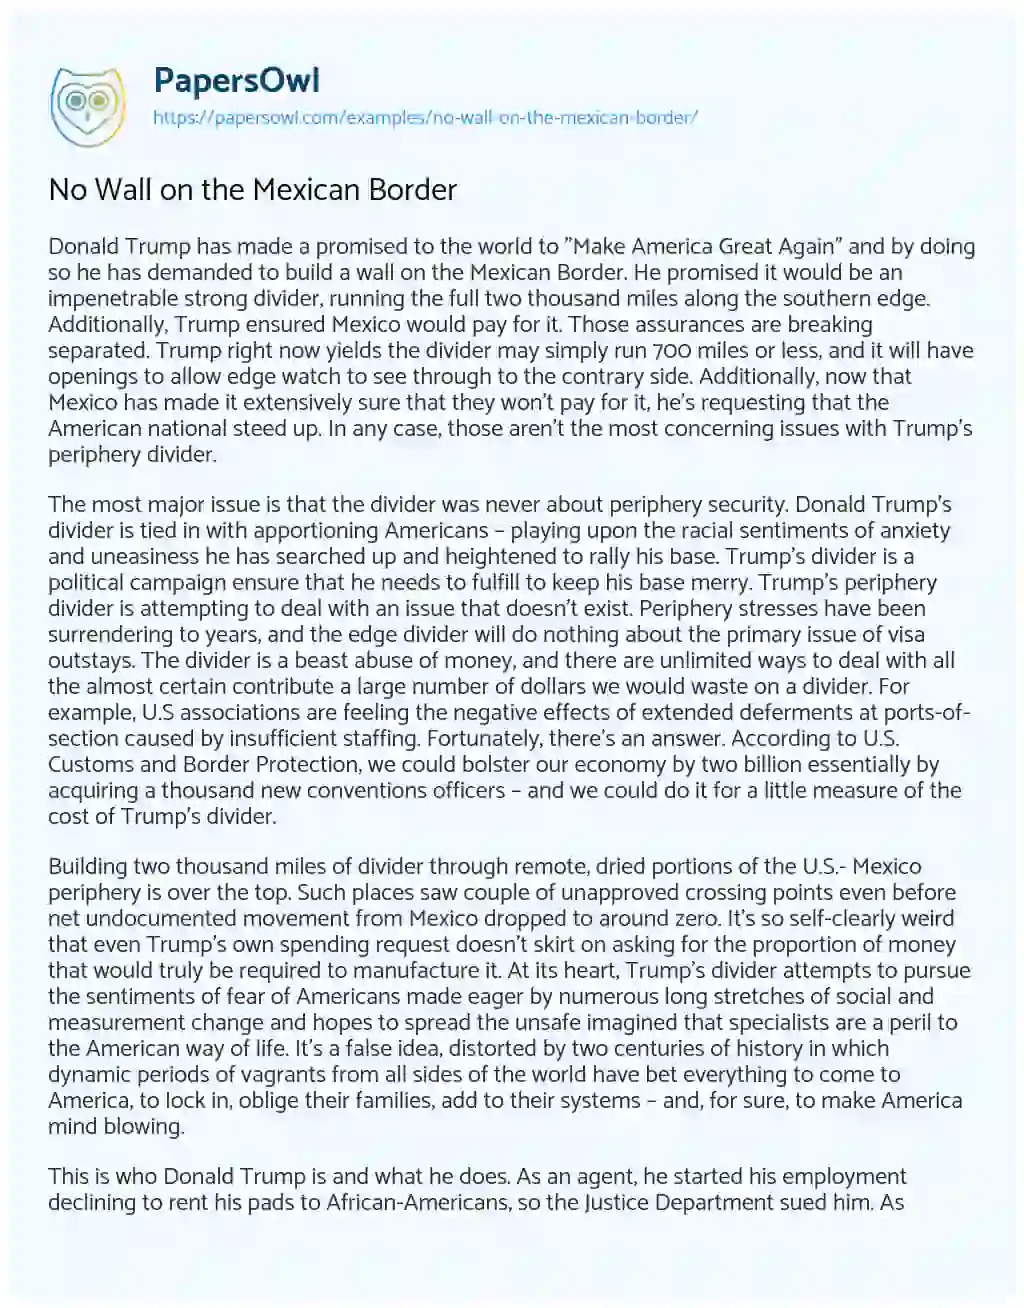 Essay on No Wall on the Mexican Border